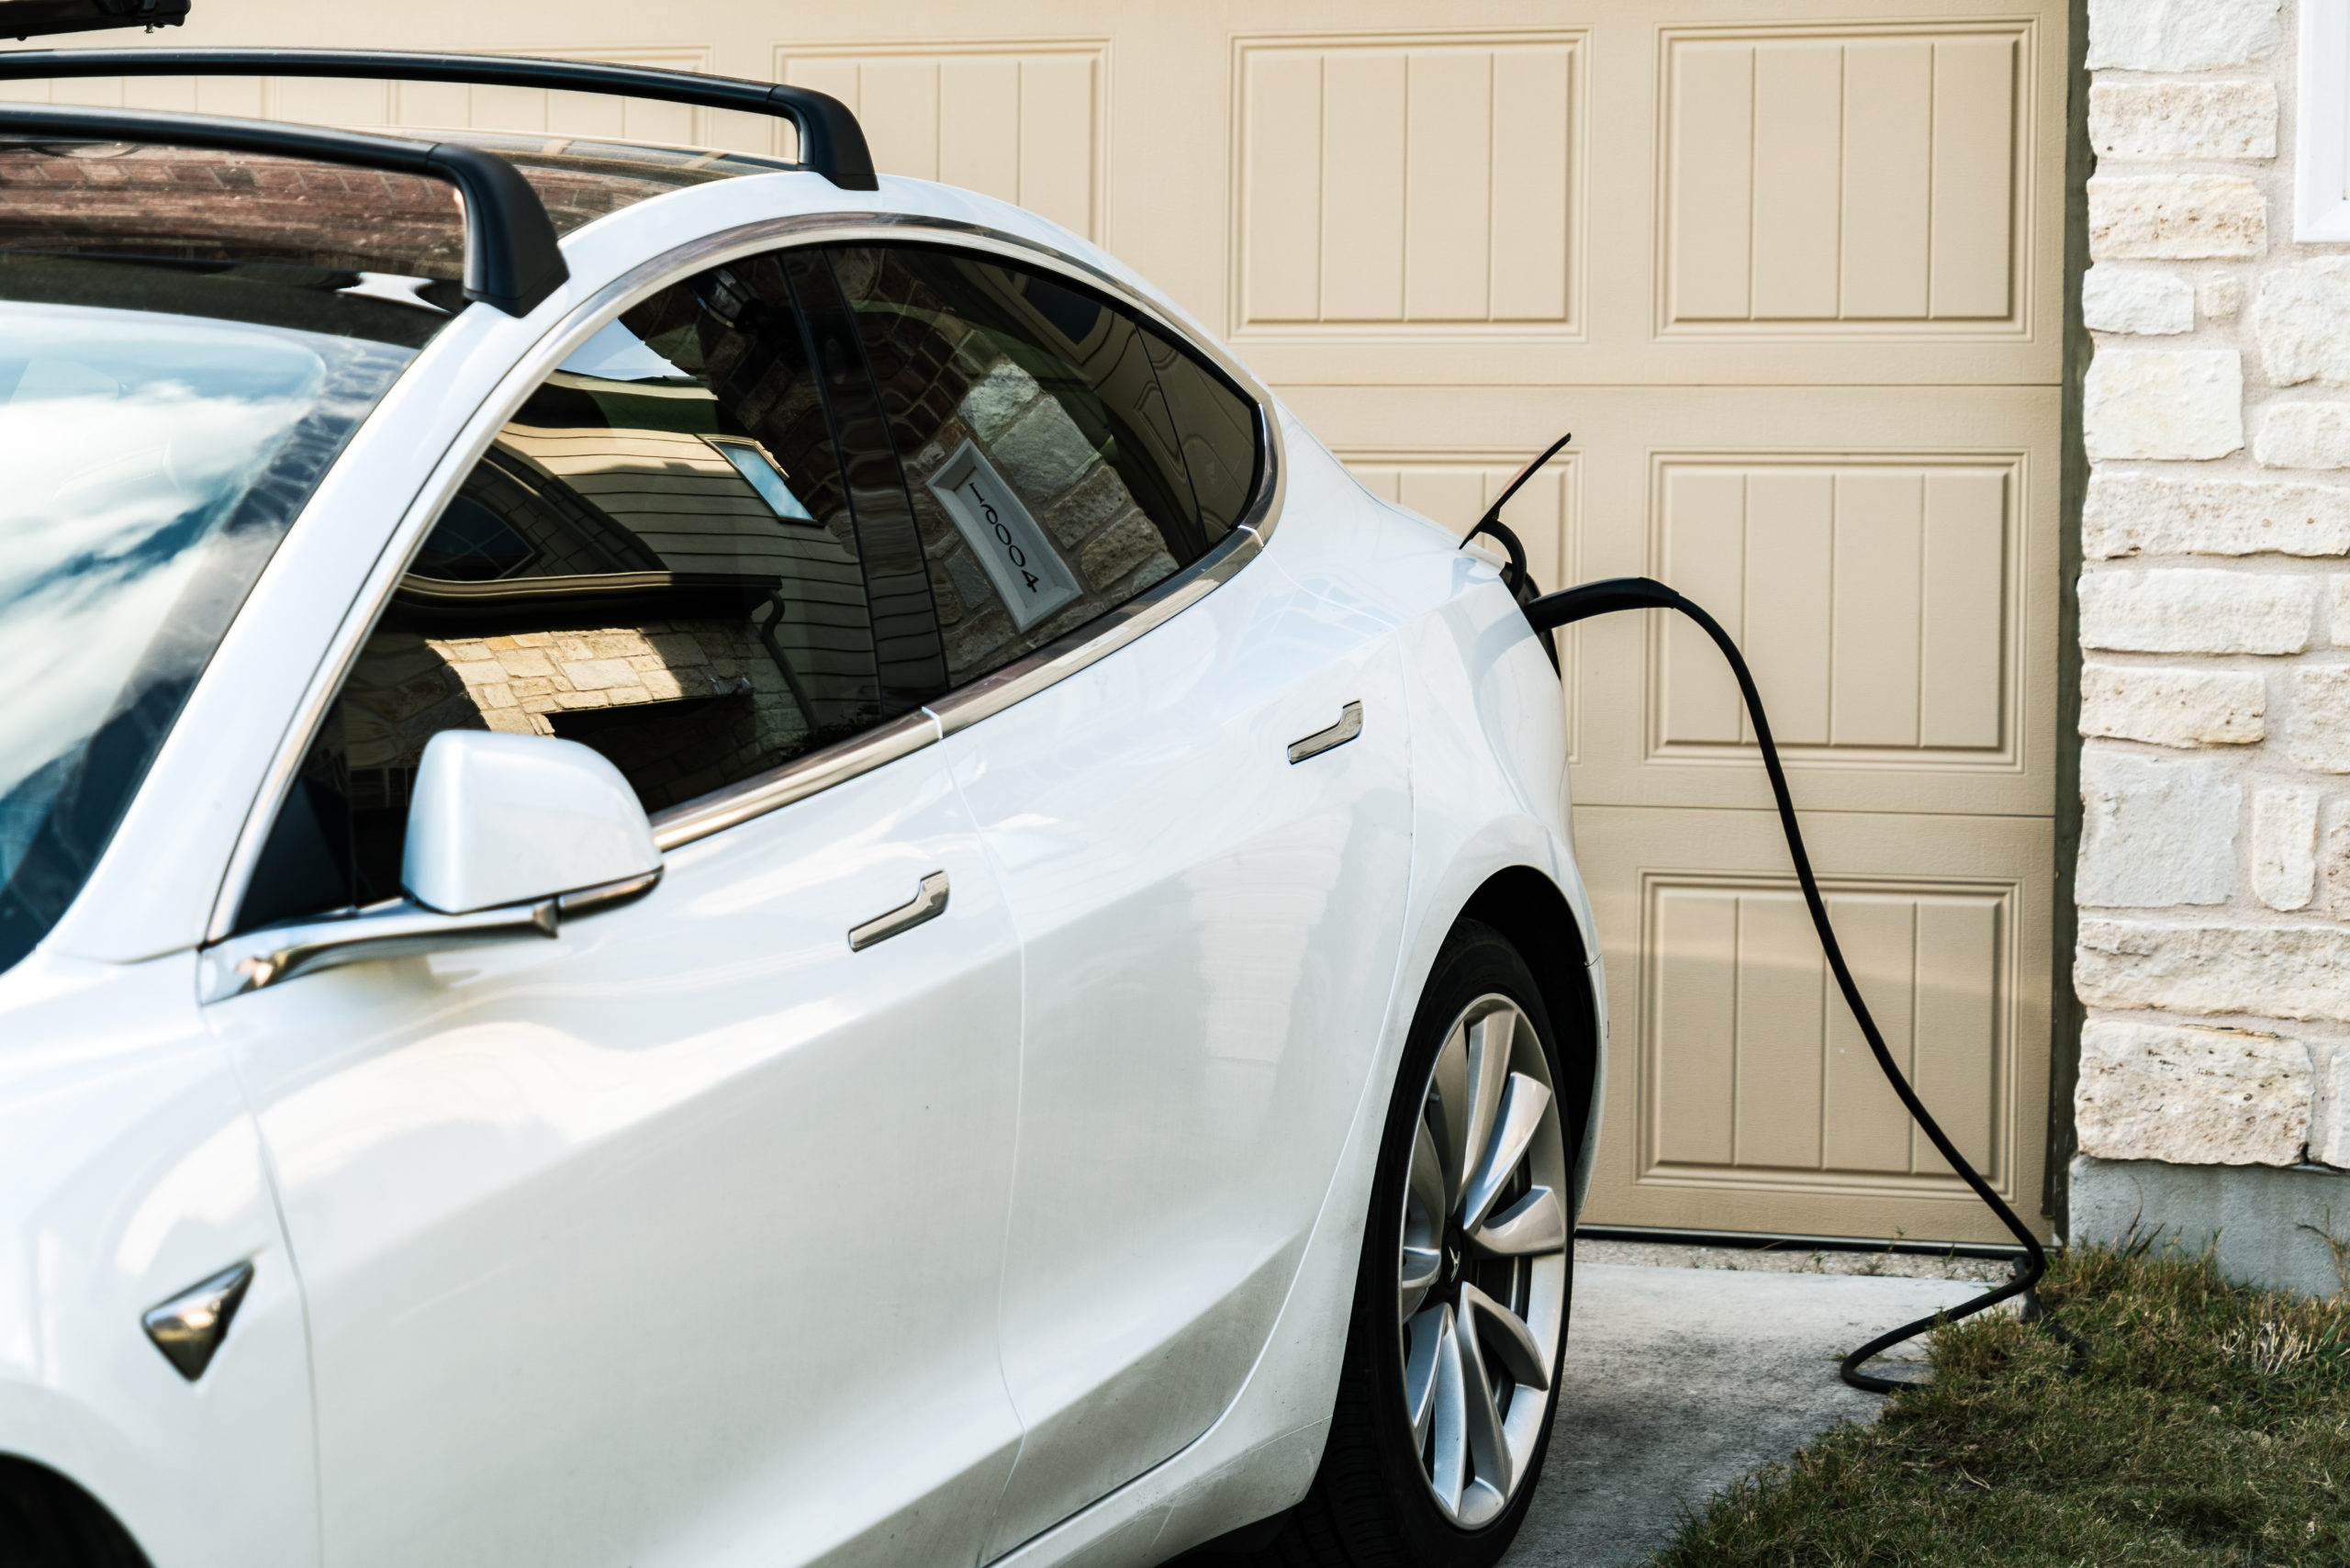 Which home charger or Level 2 charger should I buy for my Tesla